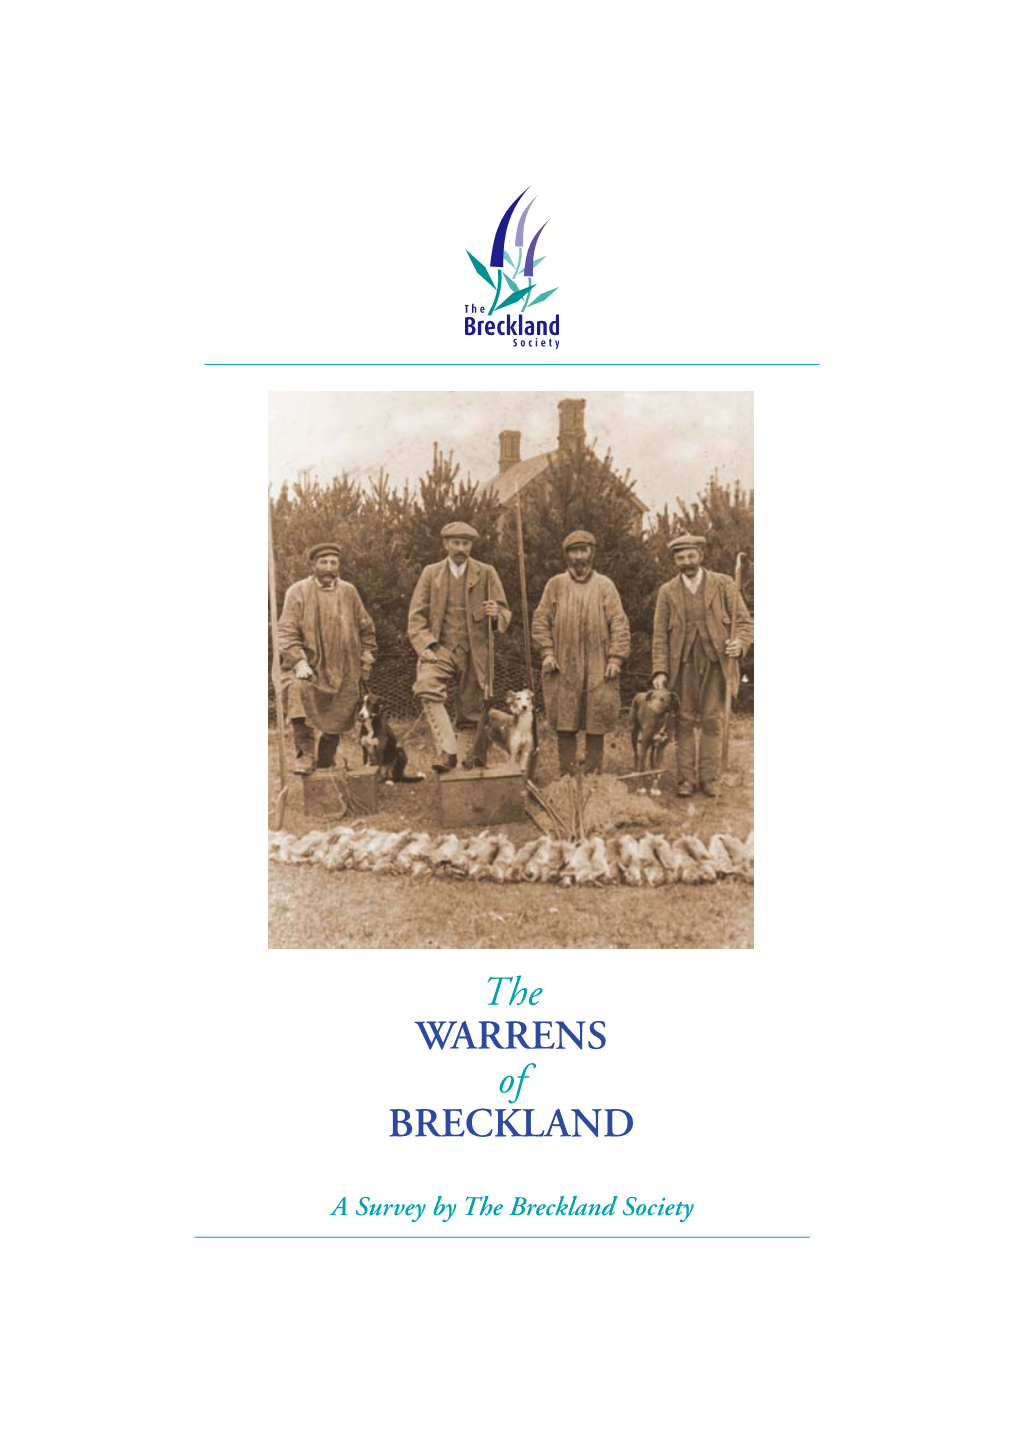 The WARRENS of BRECKLAND